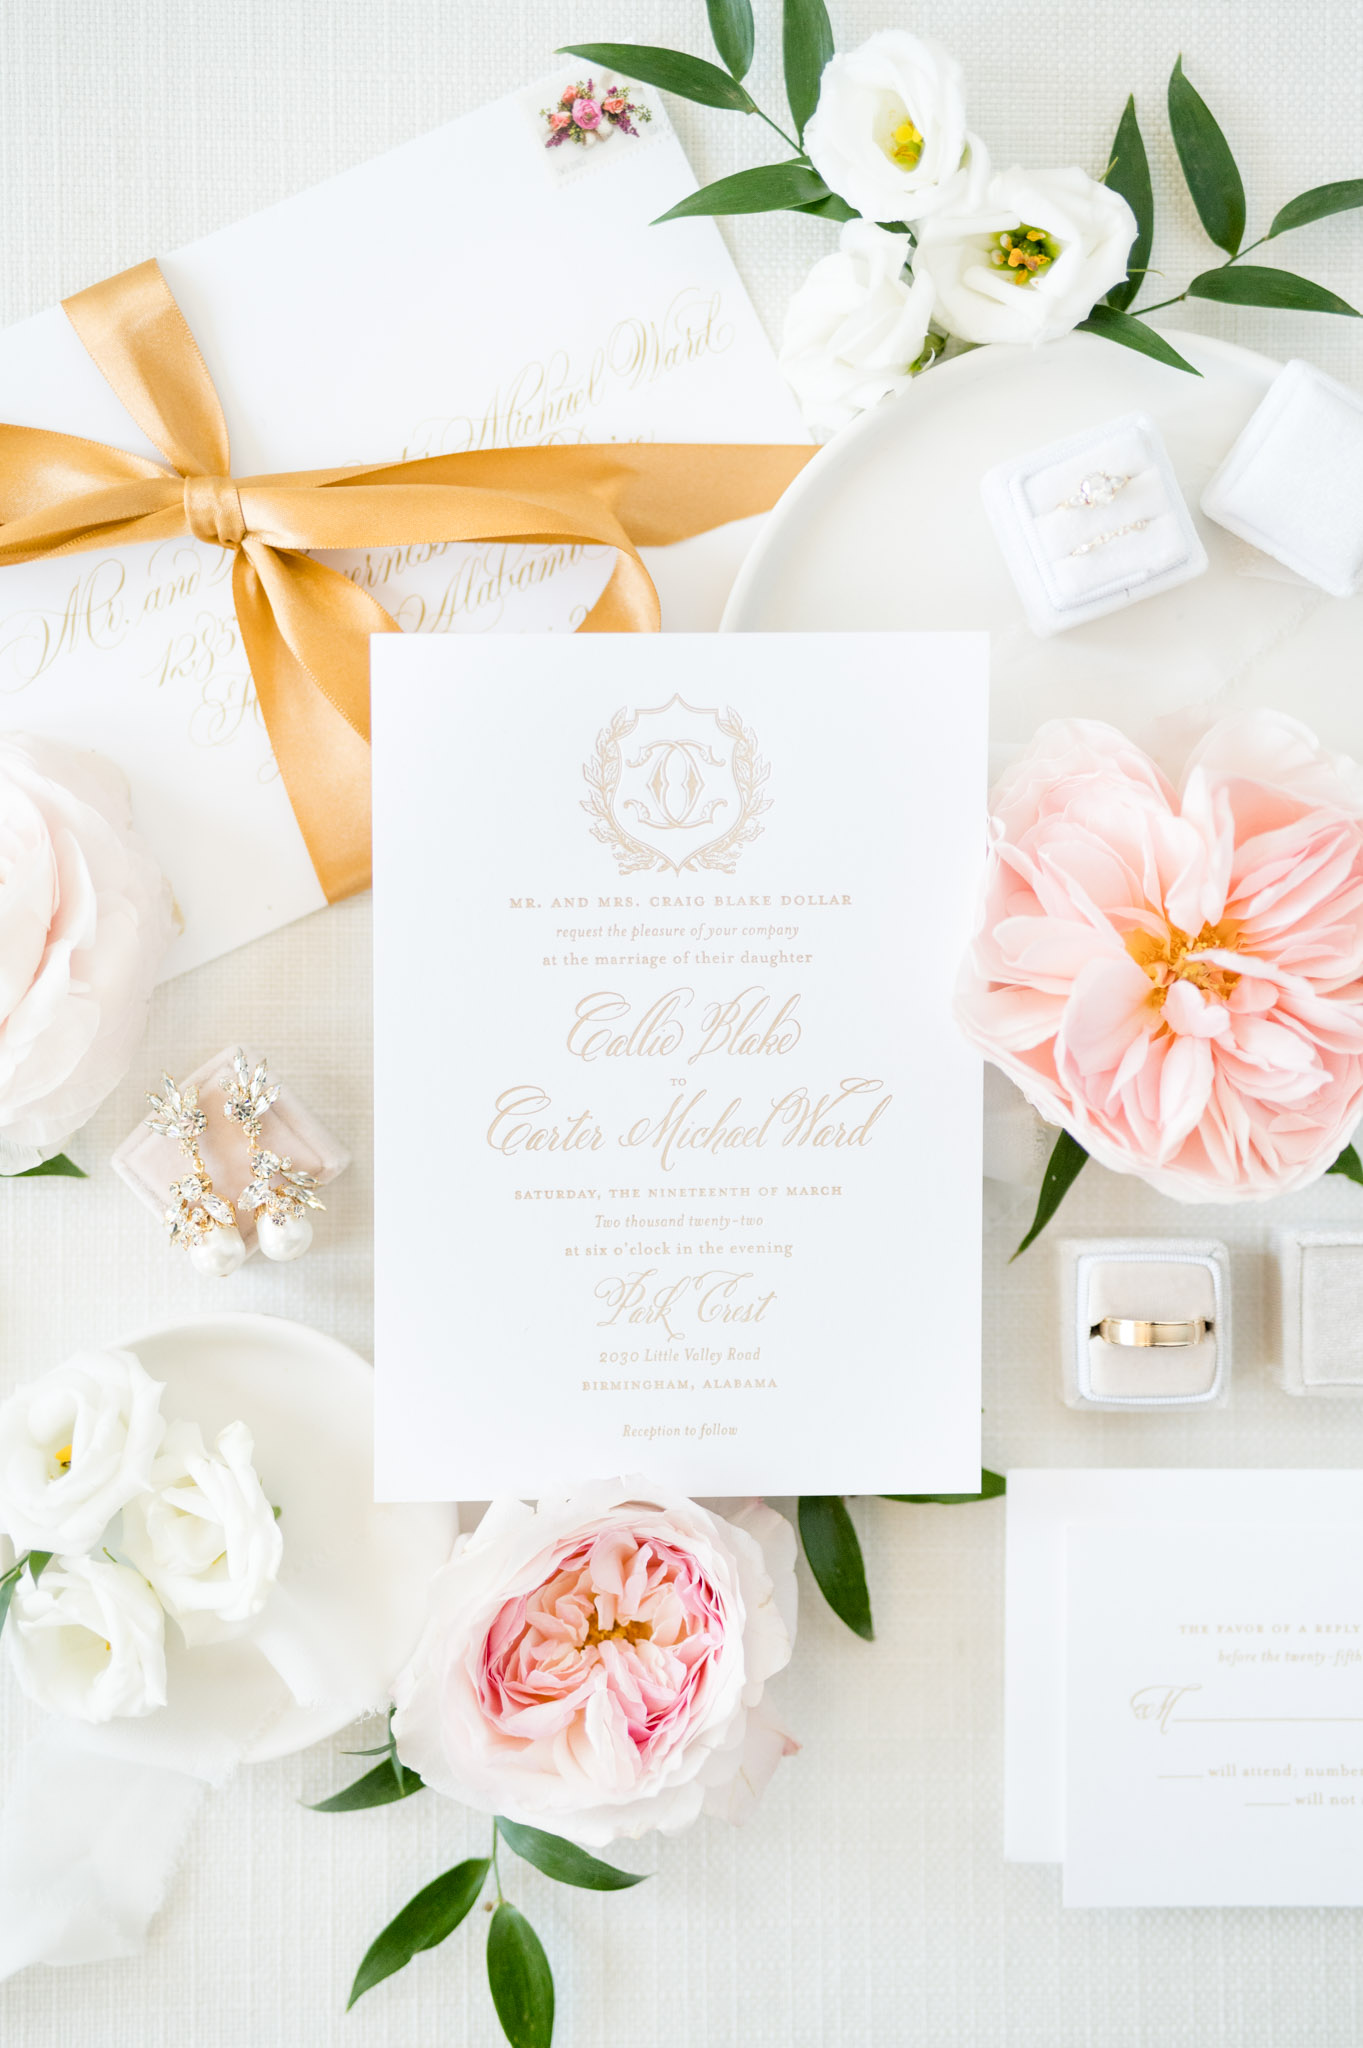 Wedding invitation is surrounded by flowers.